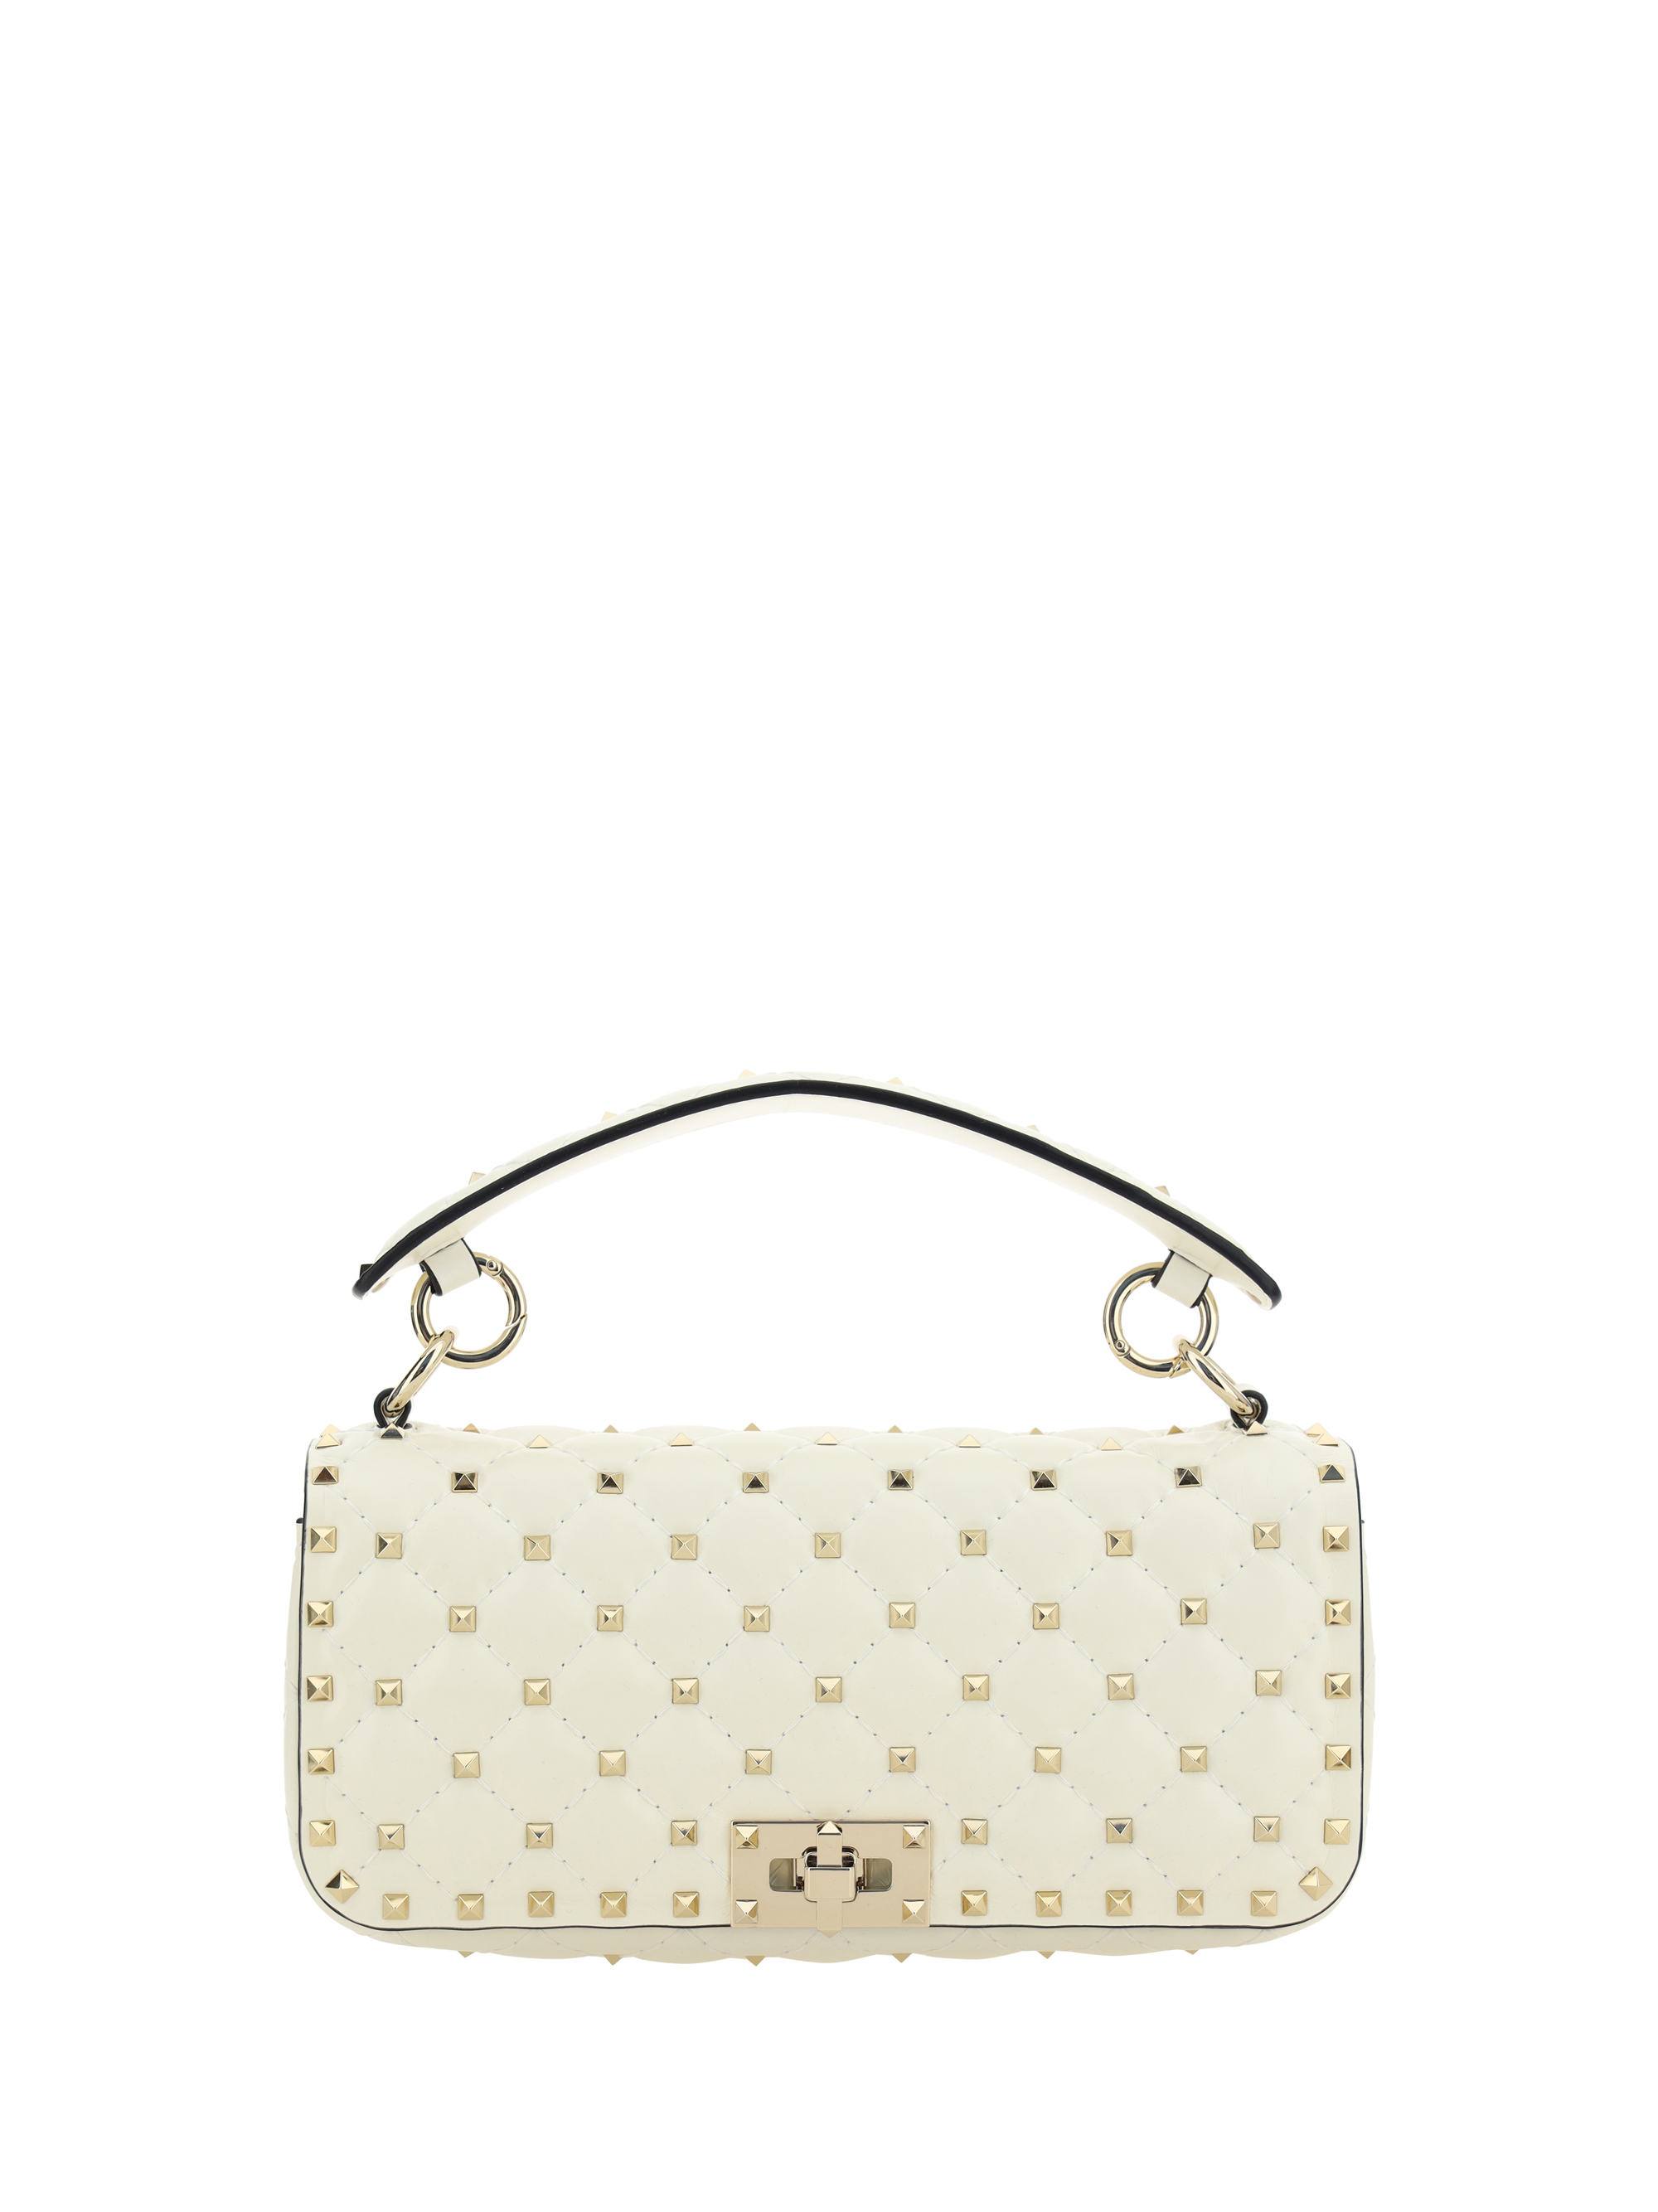 VALENTINO GARAVANI: Rockstud bag in quilted nappa leather - Ivory